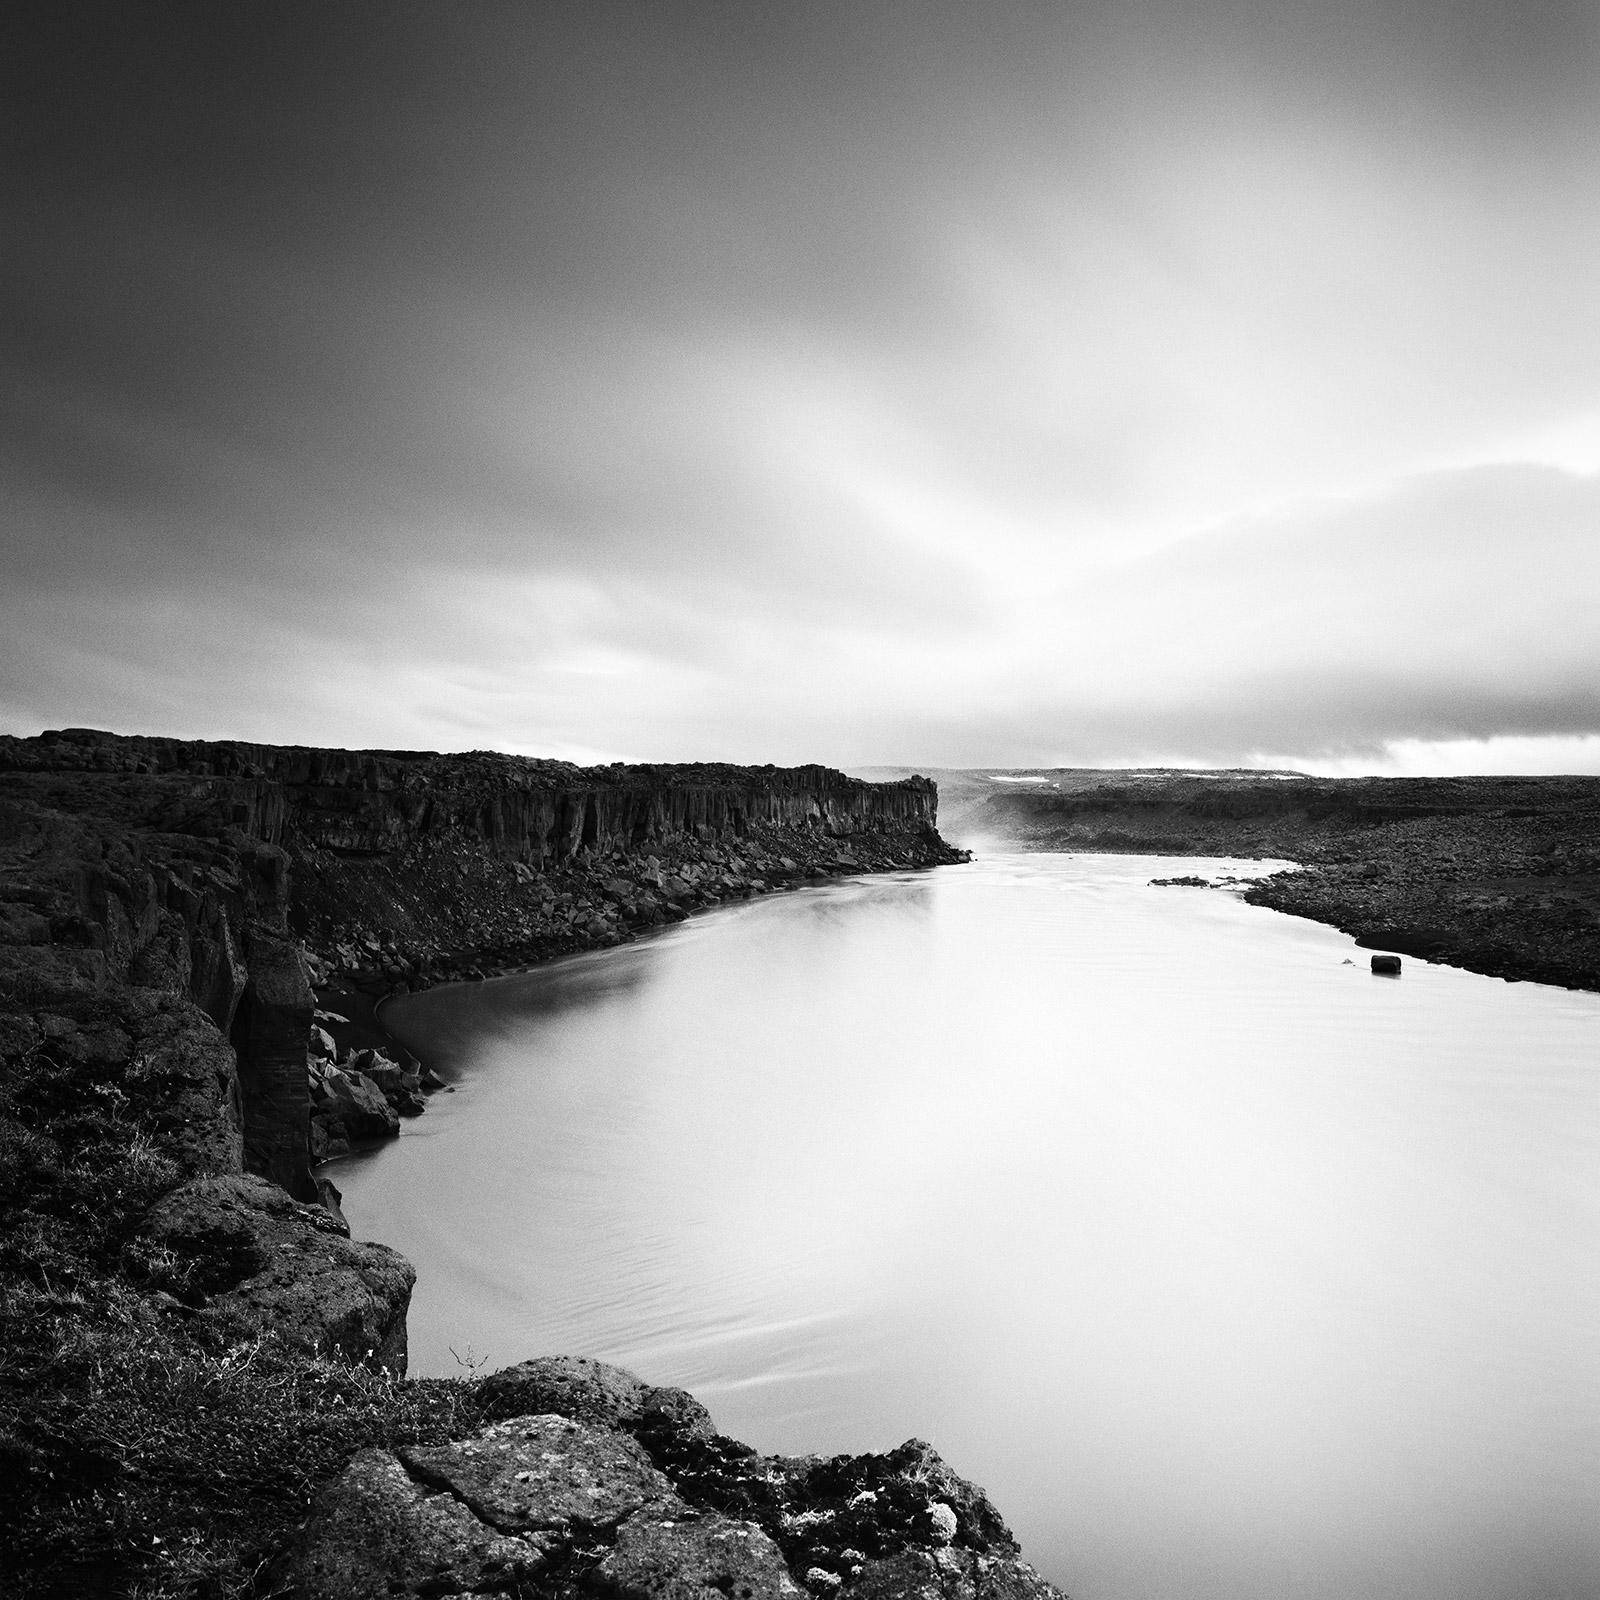 Gerald Berghammer Landscape Photograph - Glacial Stream, Iceland, long exposure, black and white landscape photography